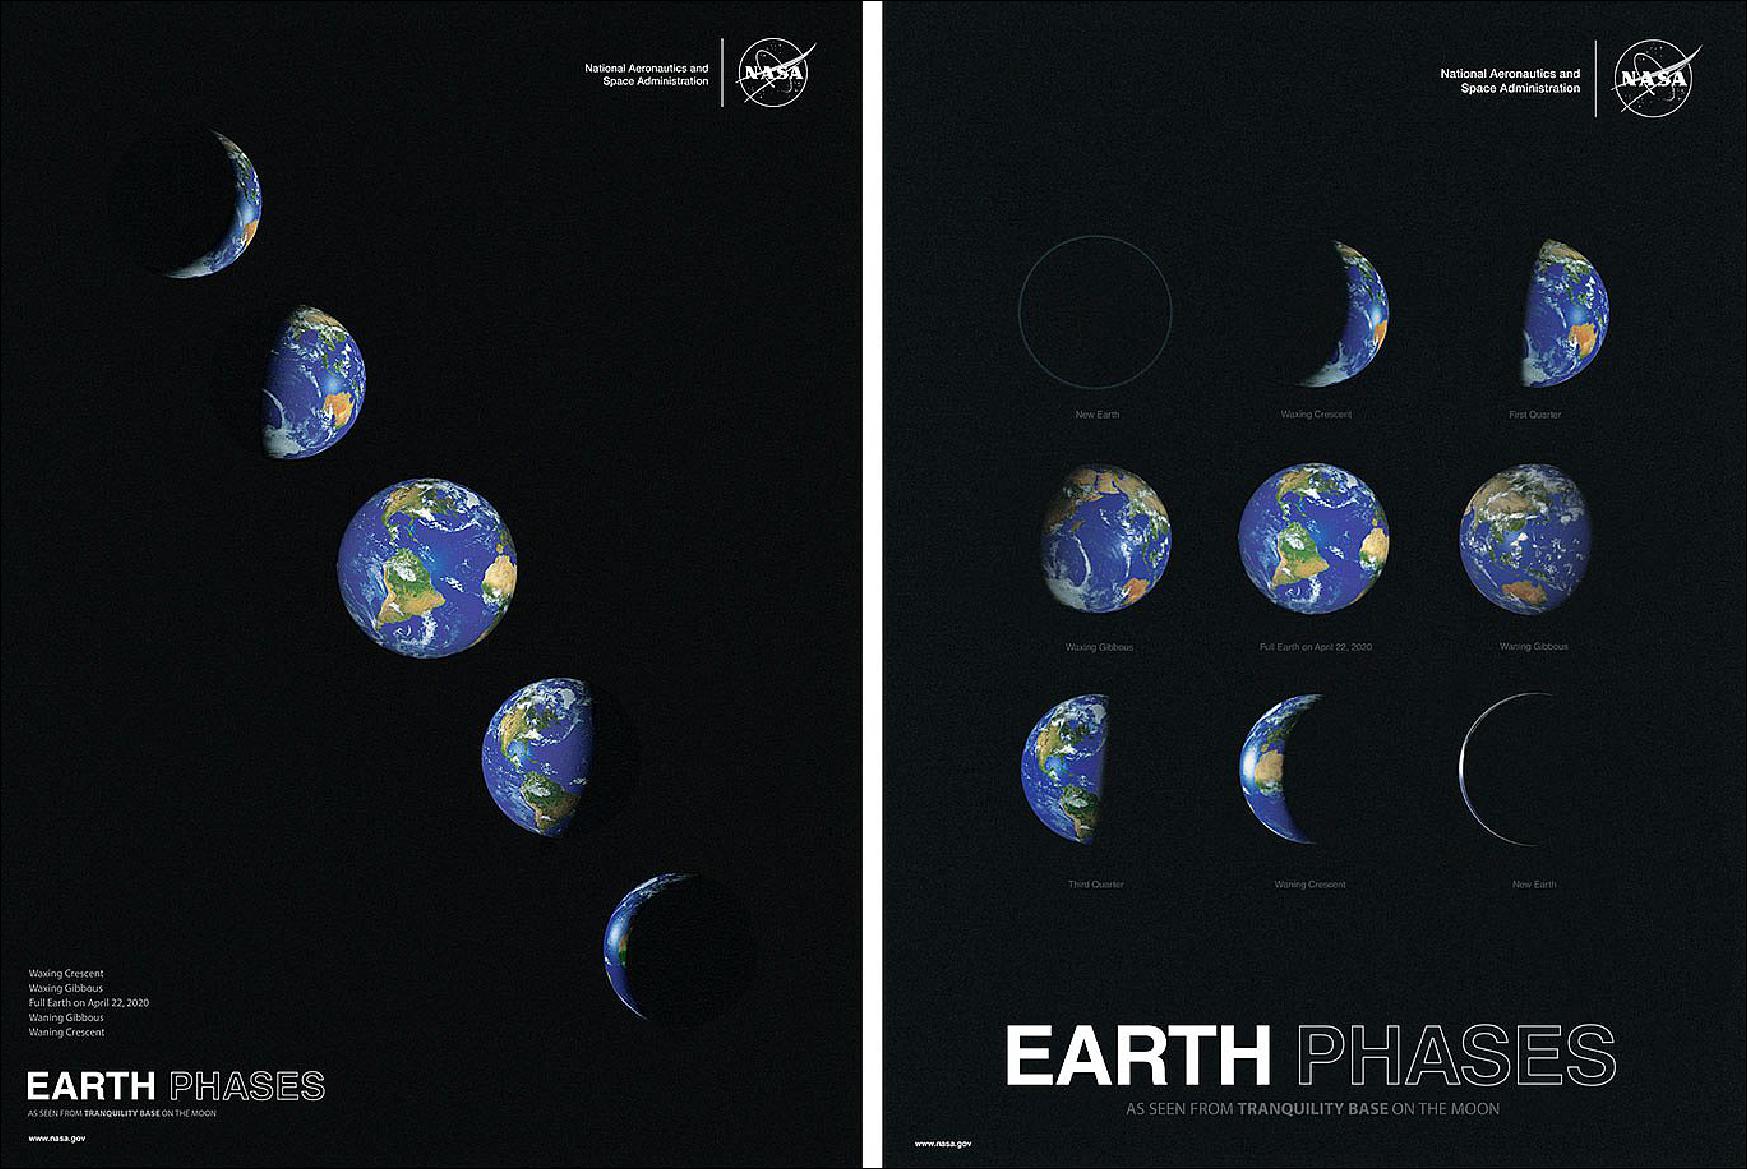 Figure 2: Our planet's phases wax and wane - just as the Moon's phases do - but in reverse order. Unlike the Moon, which always shows the same face to Earth, our planet spins noticeably on its axis every day. So someone on the Moon looking at Earth would observe its surface features change each day, as well as its phase. Shifting the perspective between planets and their moons, this poster captures those phases as they would be seen from the Moon, including the full Earth as it will actually appear on April 22, 2020 (image credit: NASA/JPL Caltech)